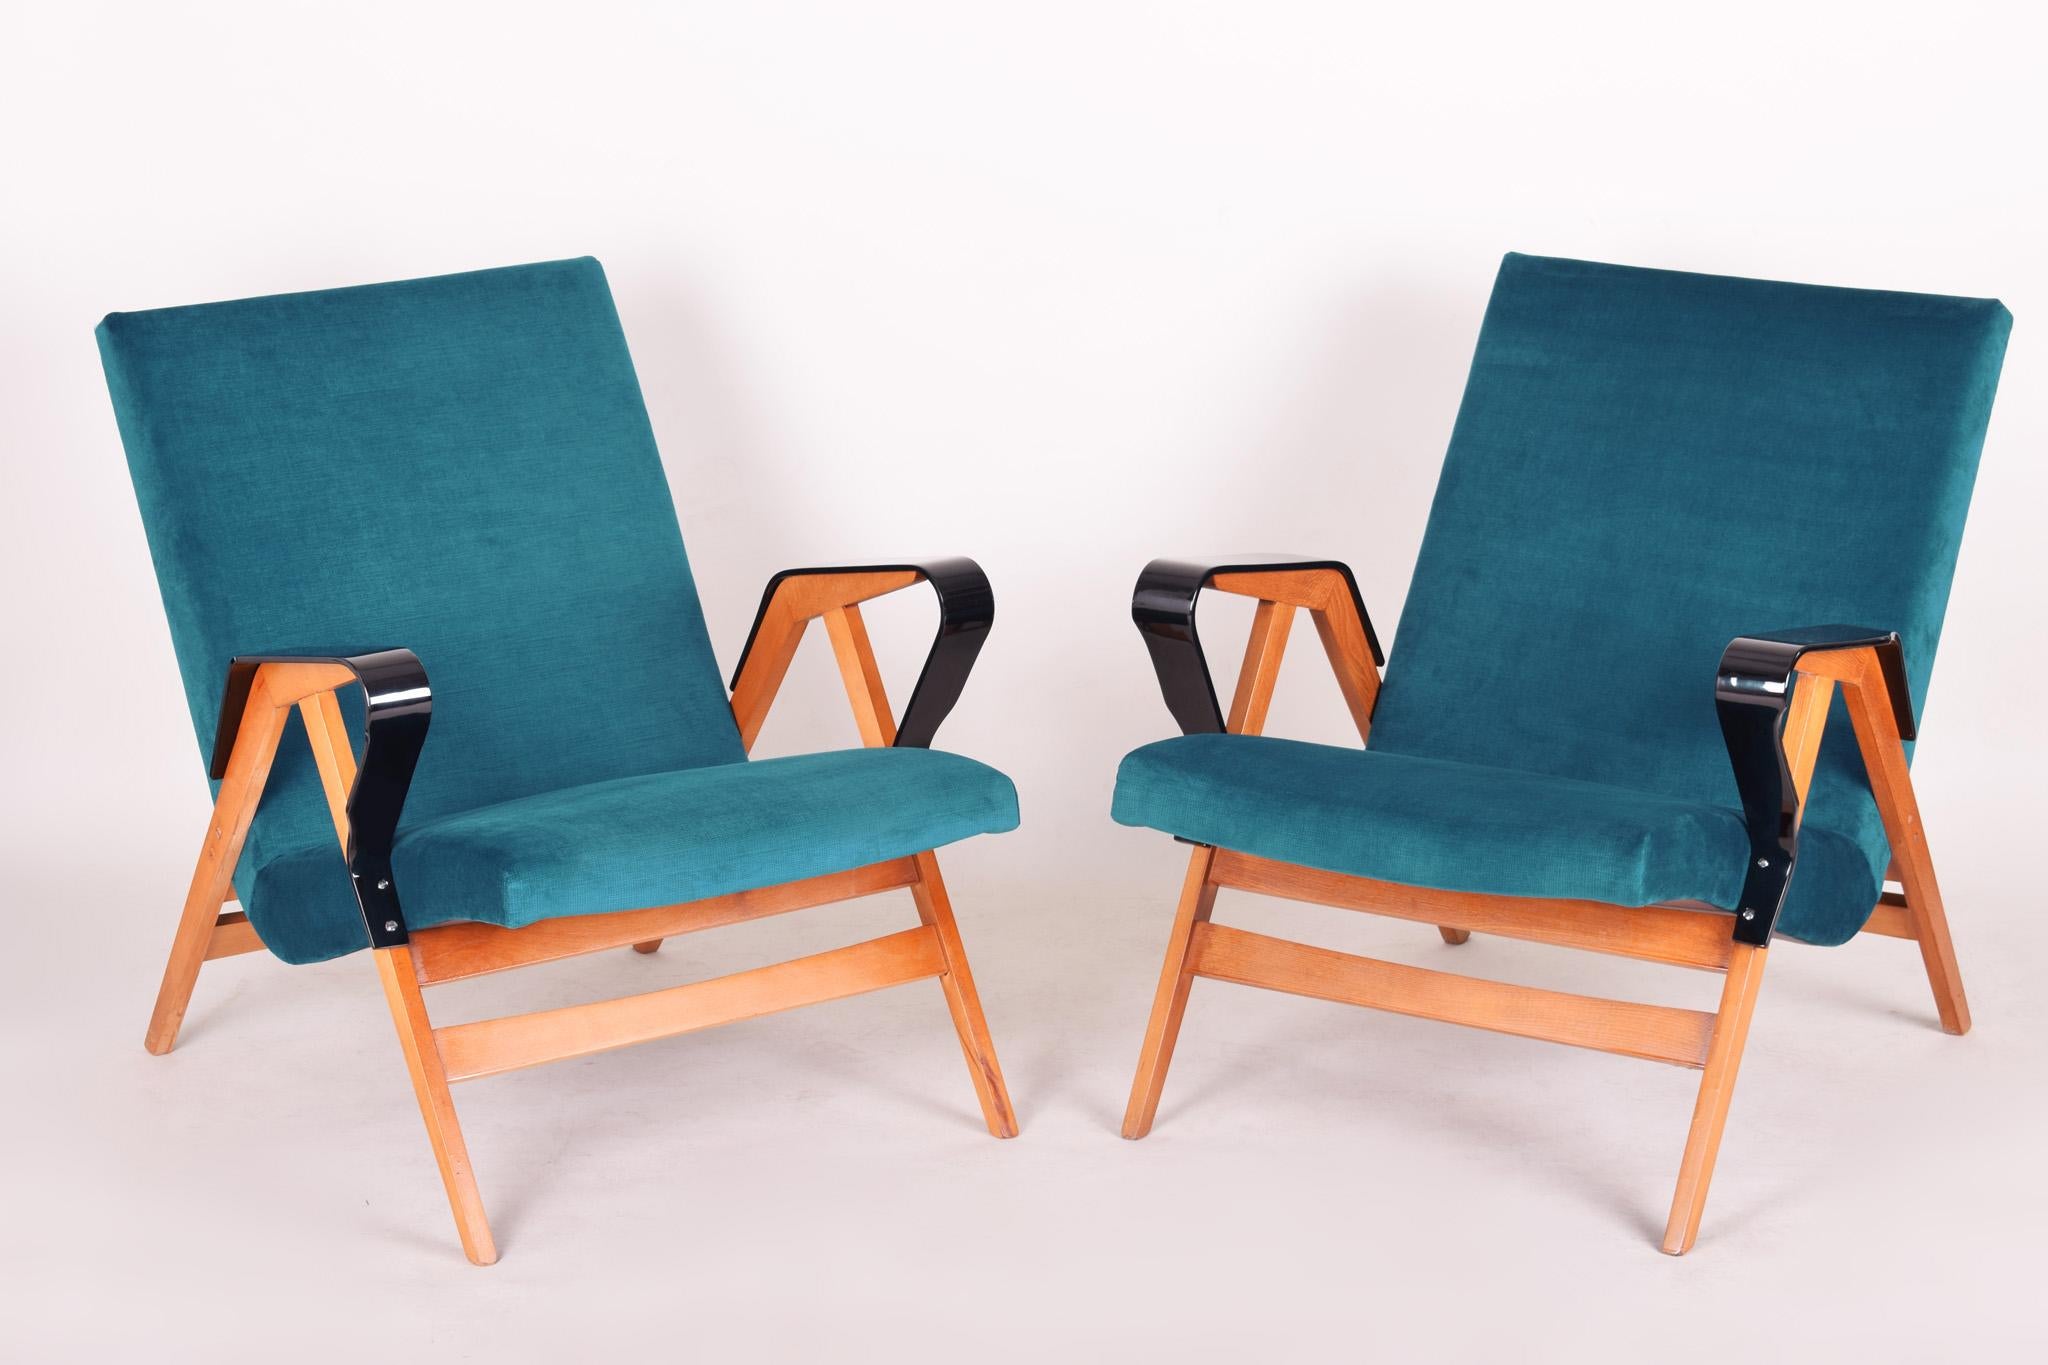 Pair of armchairs, midcentury Czechoslovakia
Completely restored. New fabric and upholstery. Period 1950-1959.